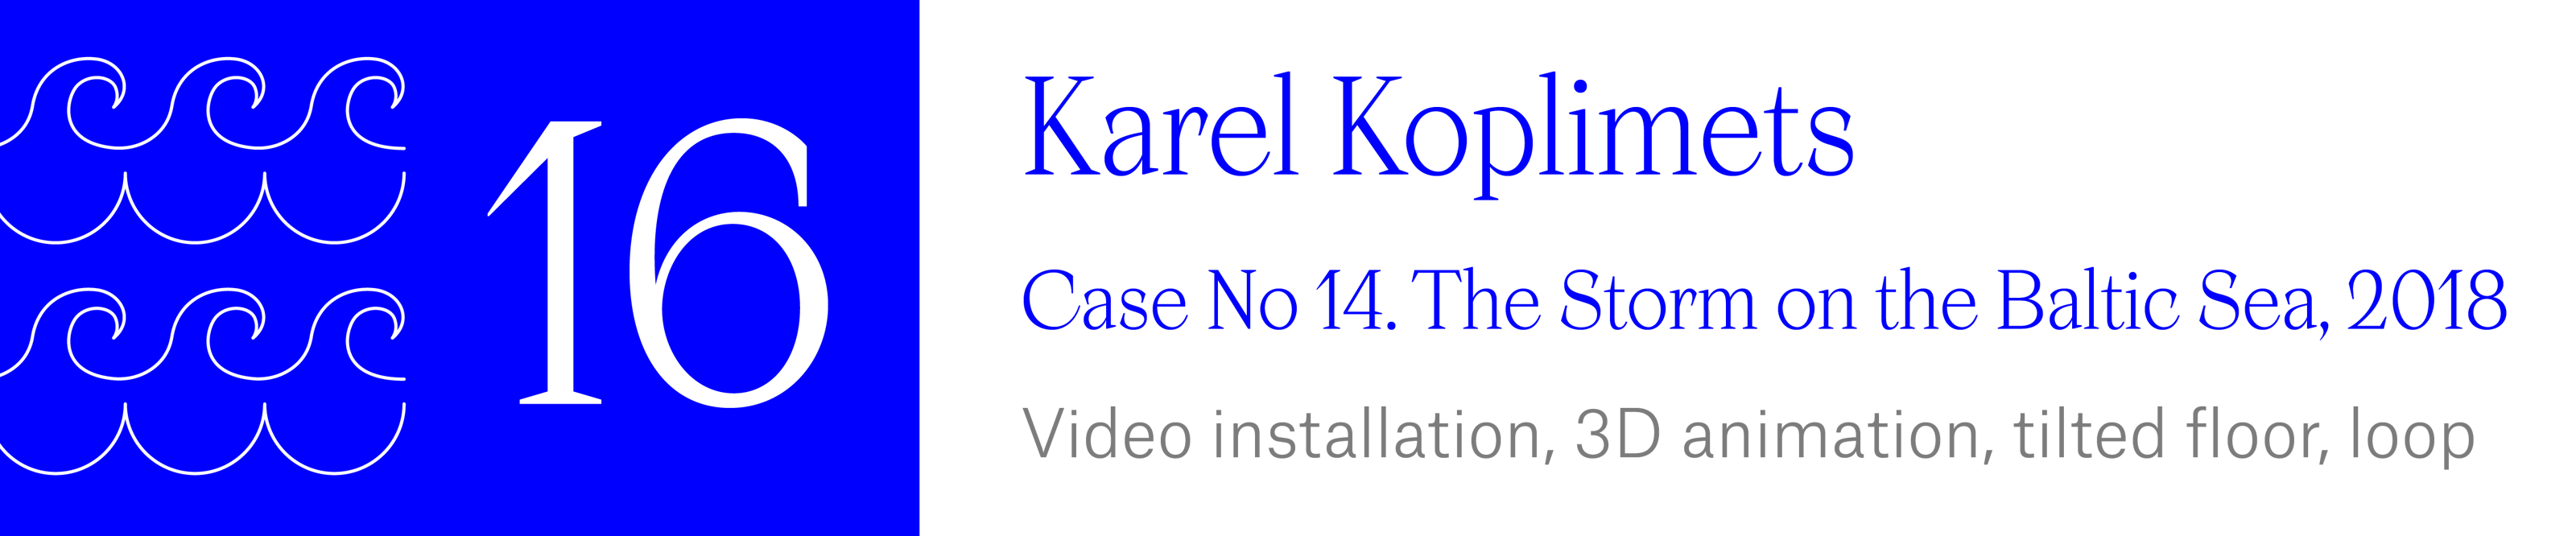 The Wave (16) Karel Koplimets - Case No. 14: The Storm on the Baltic Sea, 2018. Video installation, 3D animation, tilted floor, loop.